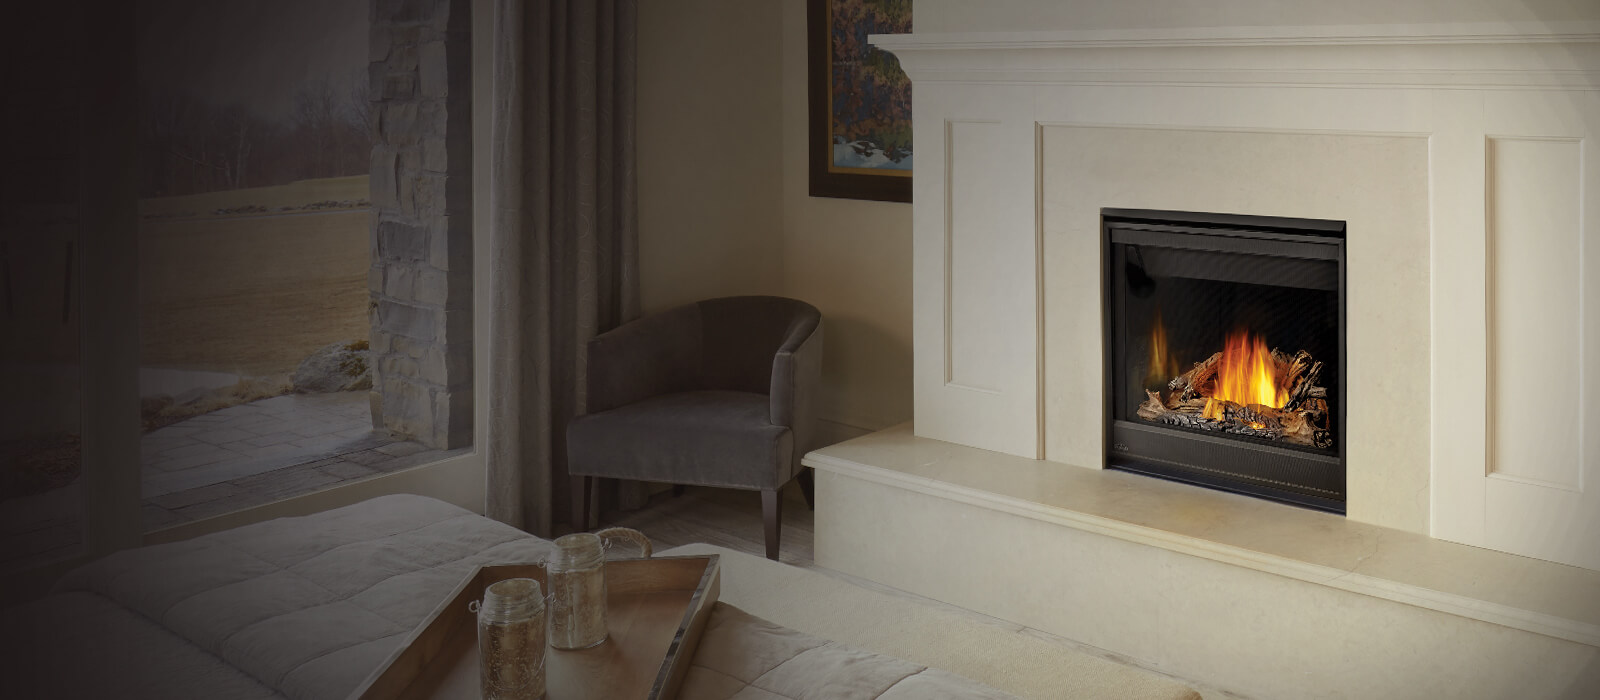 Q2 Gas Fireplace with Modern Surround, Brick Liner, and a High Definition  Log Se - Traditional - Living Room - Vancouver - by Okanagan Home Center